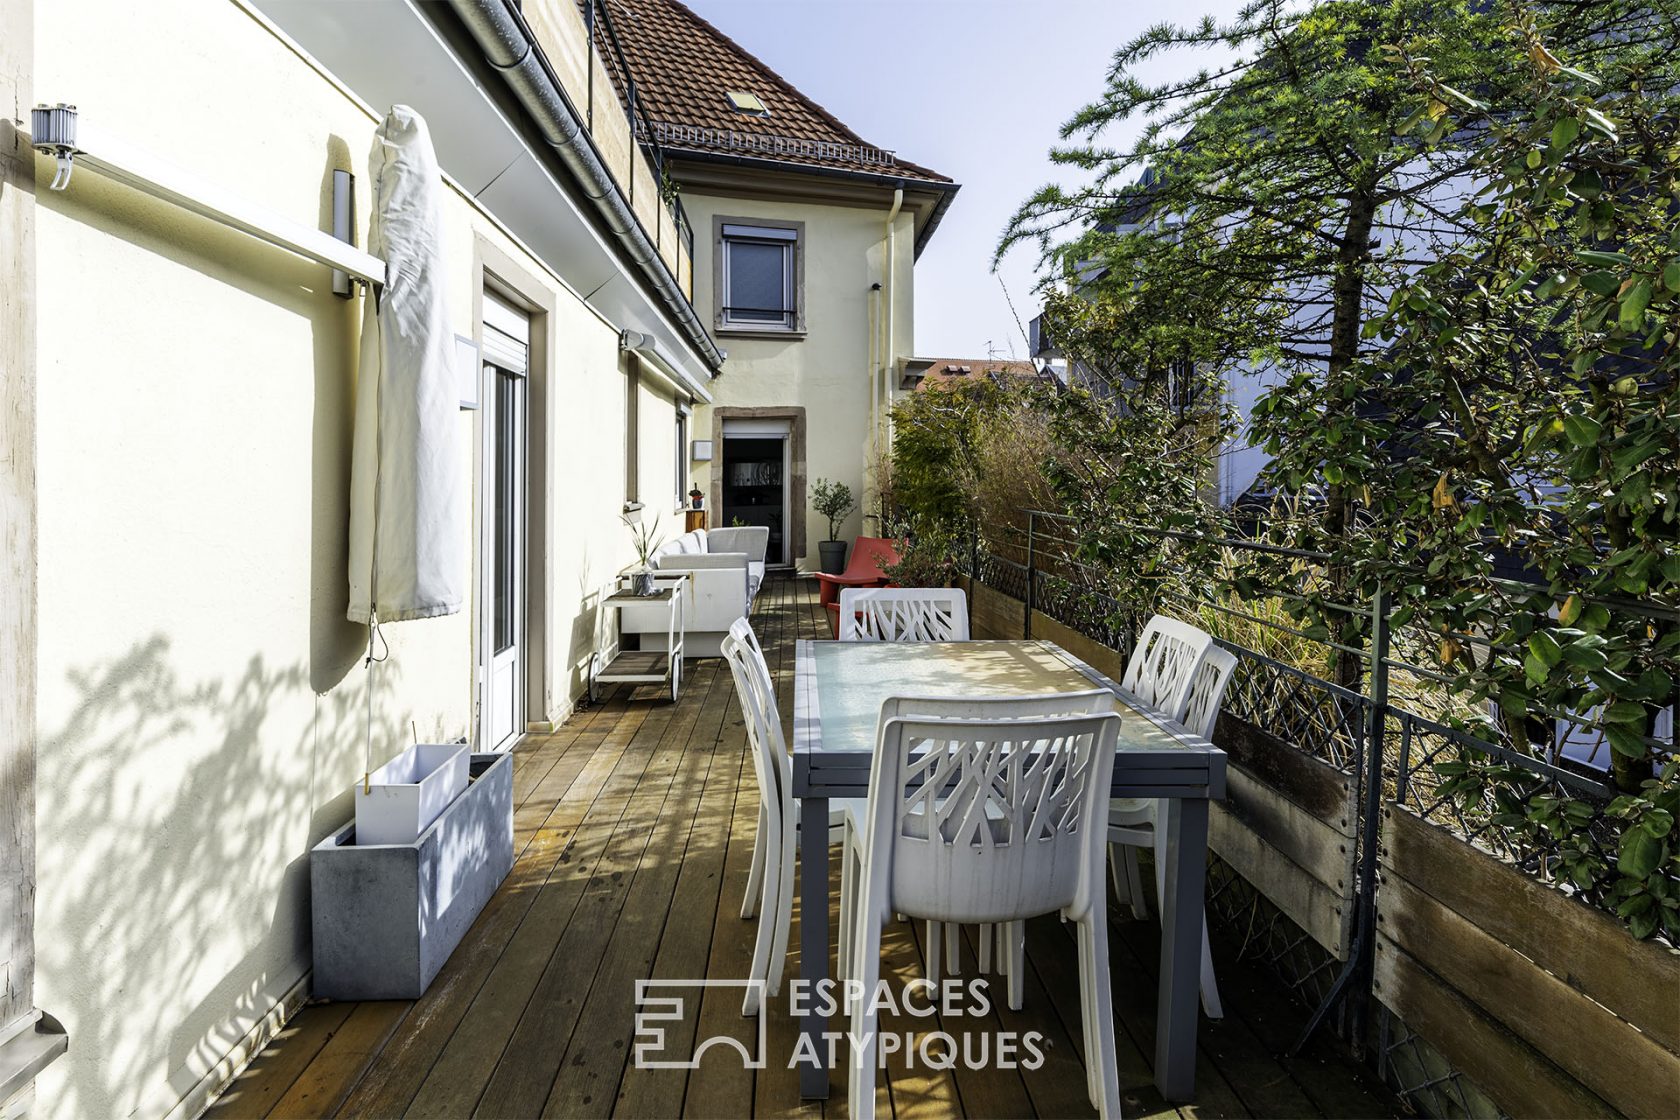 Bourgeois flat and its exceptional terrace